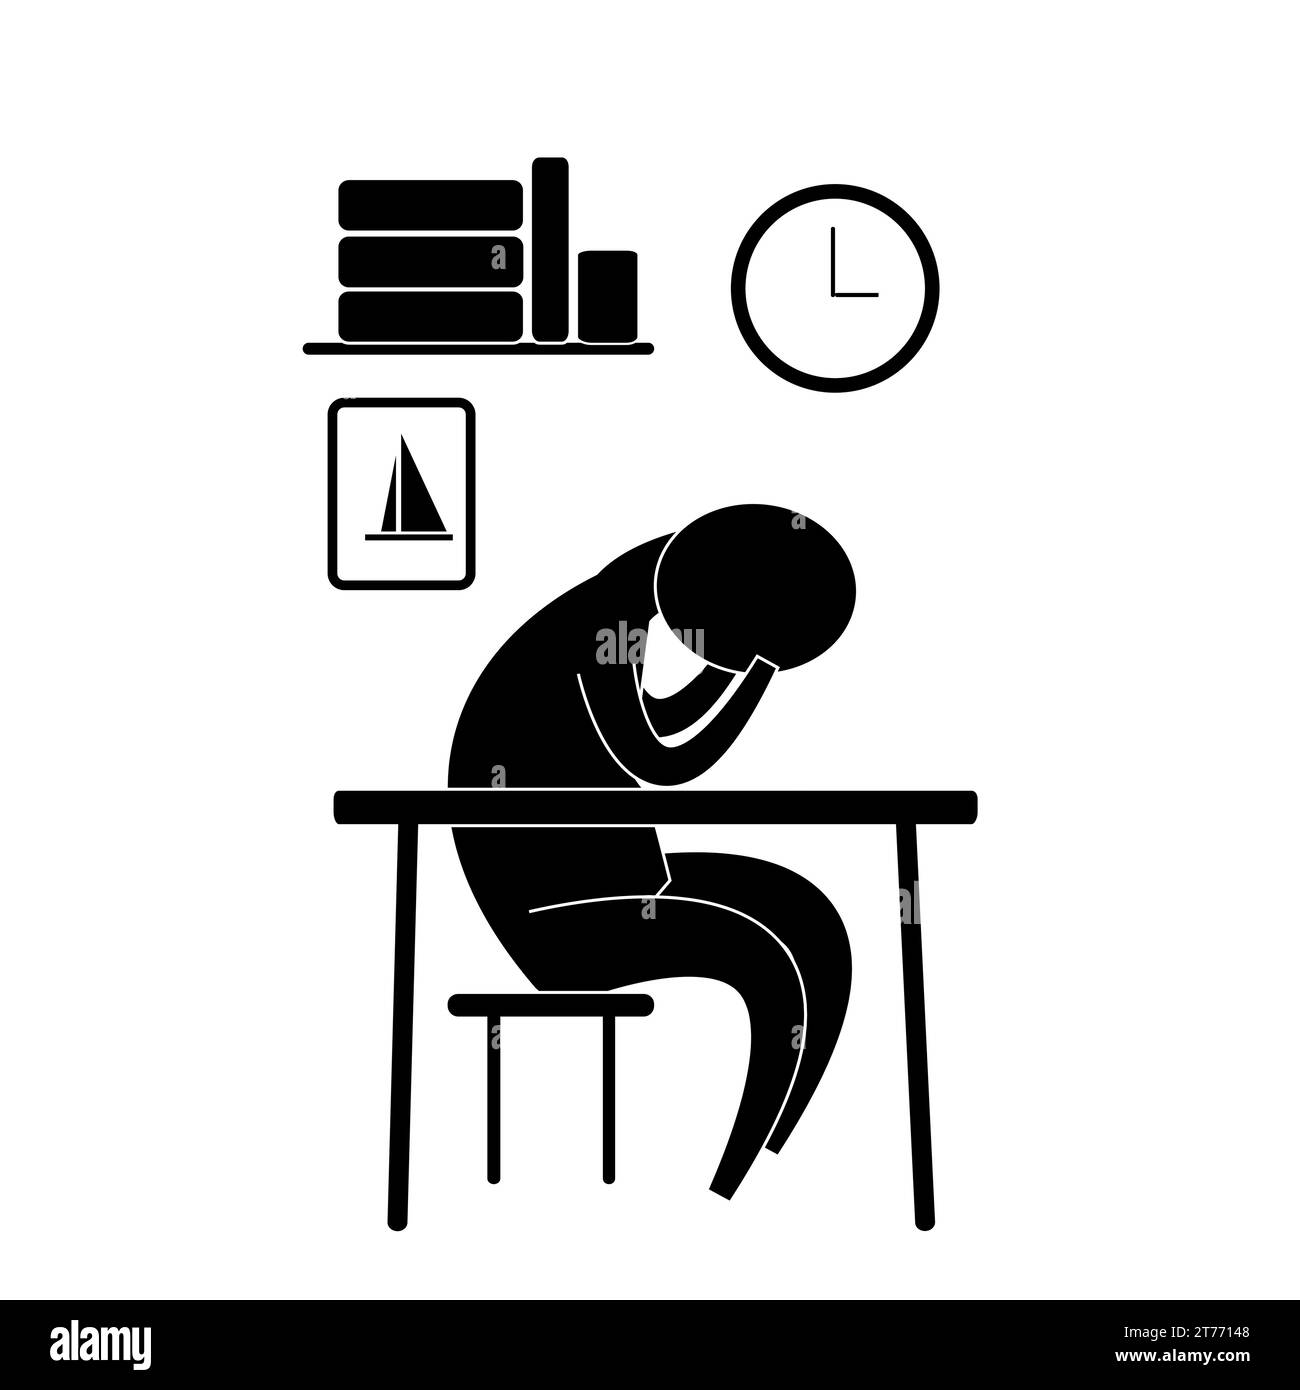 Icon silhouette of a man sitting on a chair with his head bowed in his hands. Above it is a shelf with books, a picture and a clock. Concept of unwill Stock Vector